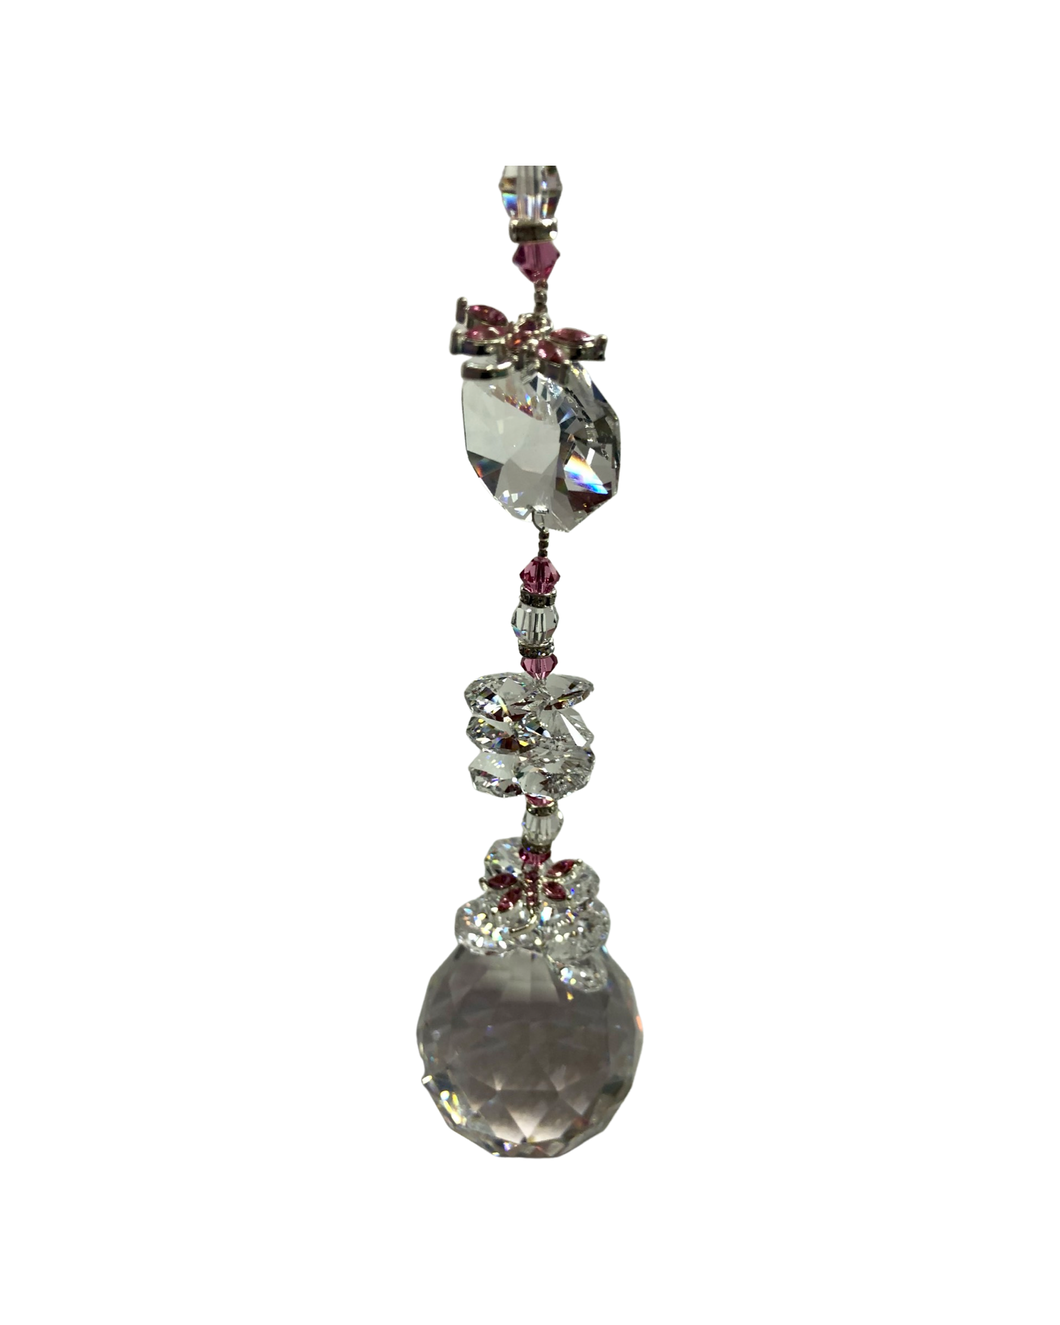 Stunning 50mm crystal ball suncatcher is decorated with dragonflies and rose quartz.